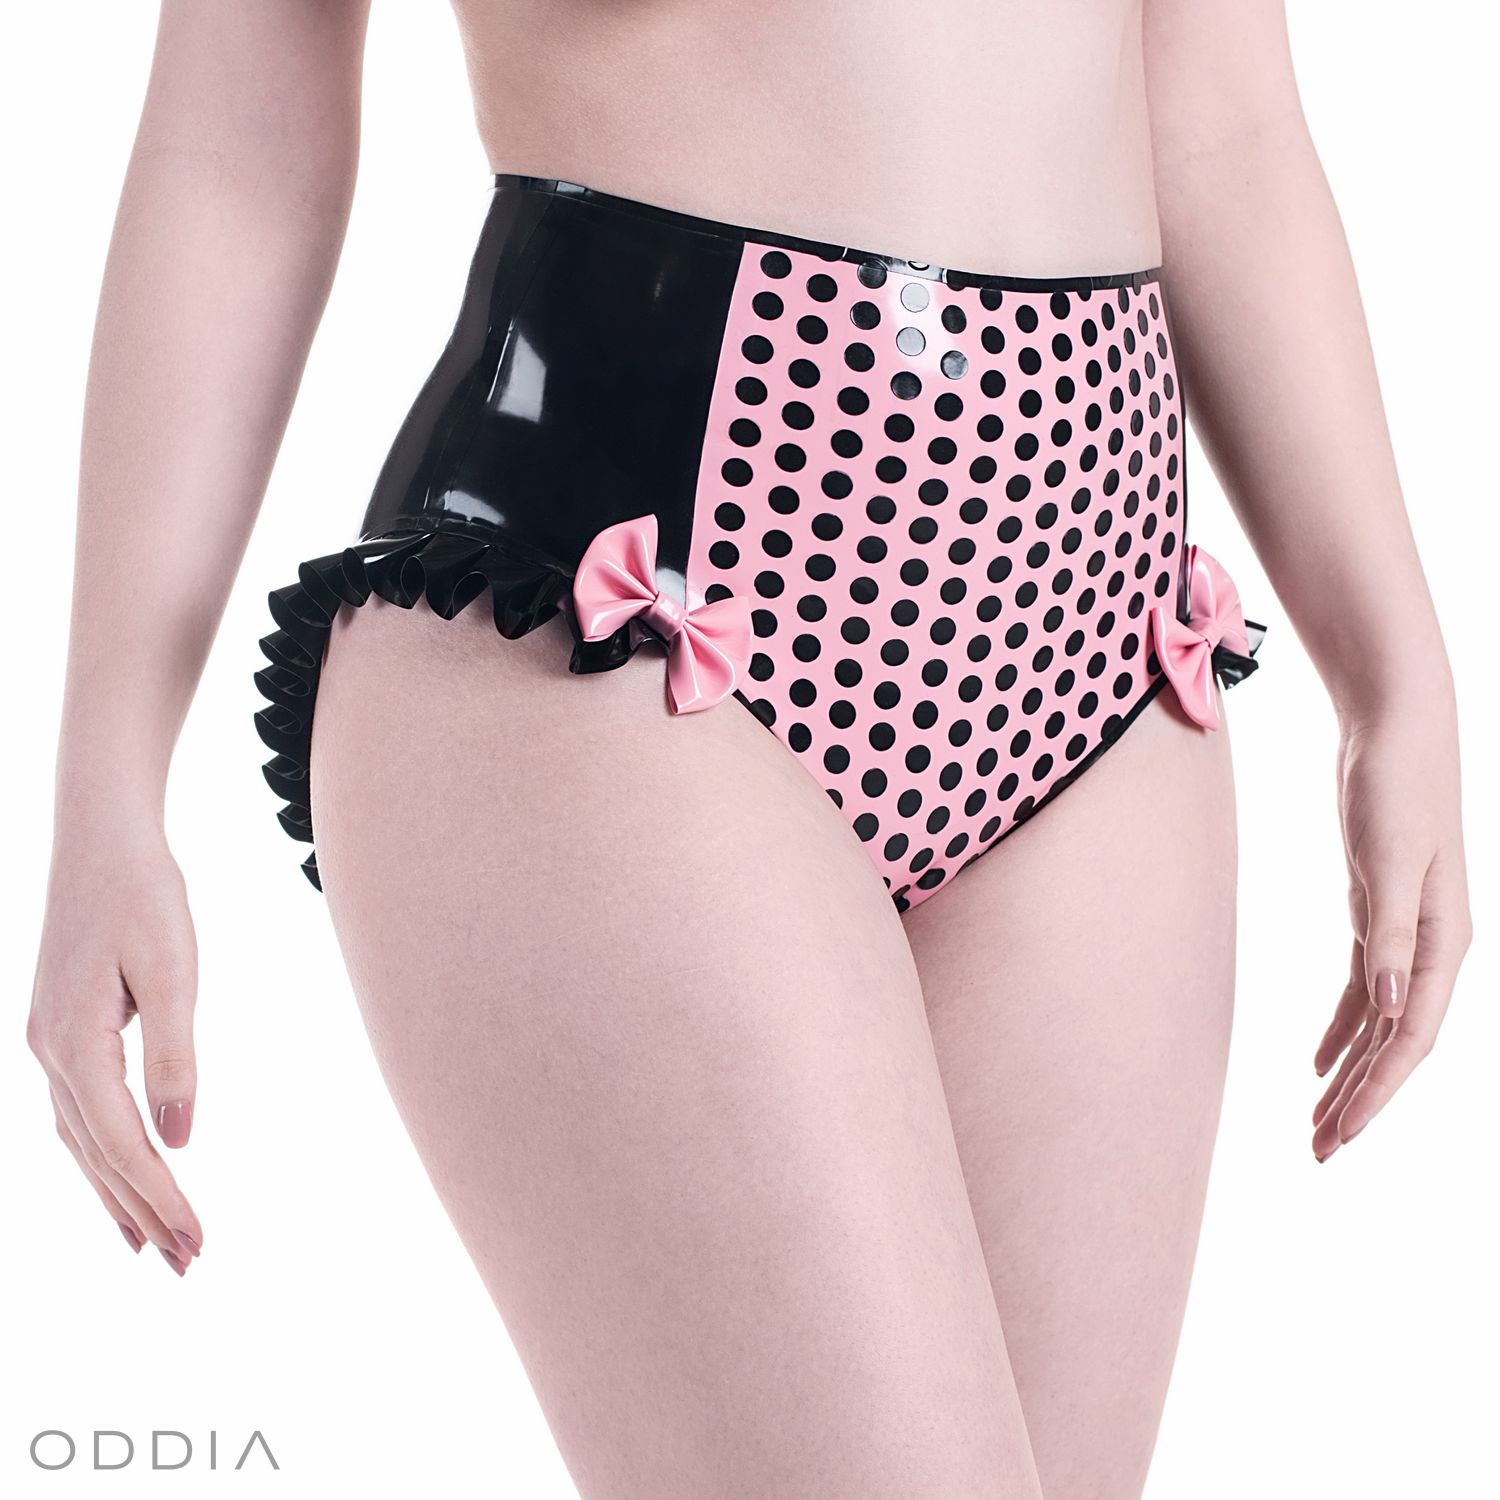 Black high waisted latex panties with a contrasting pink center, adorned with dots, ruffles, and bows